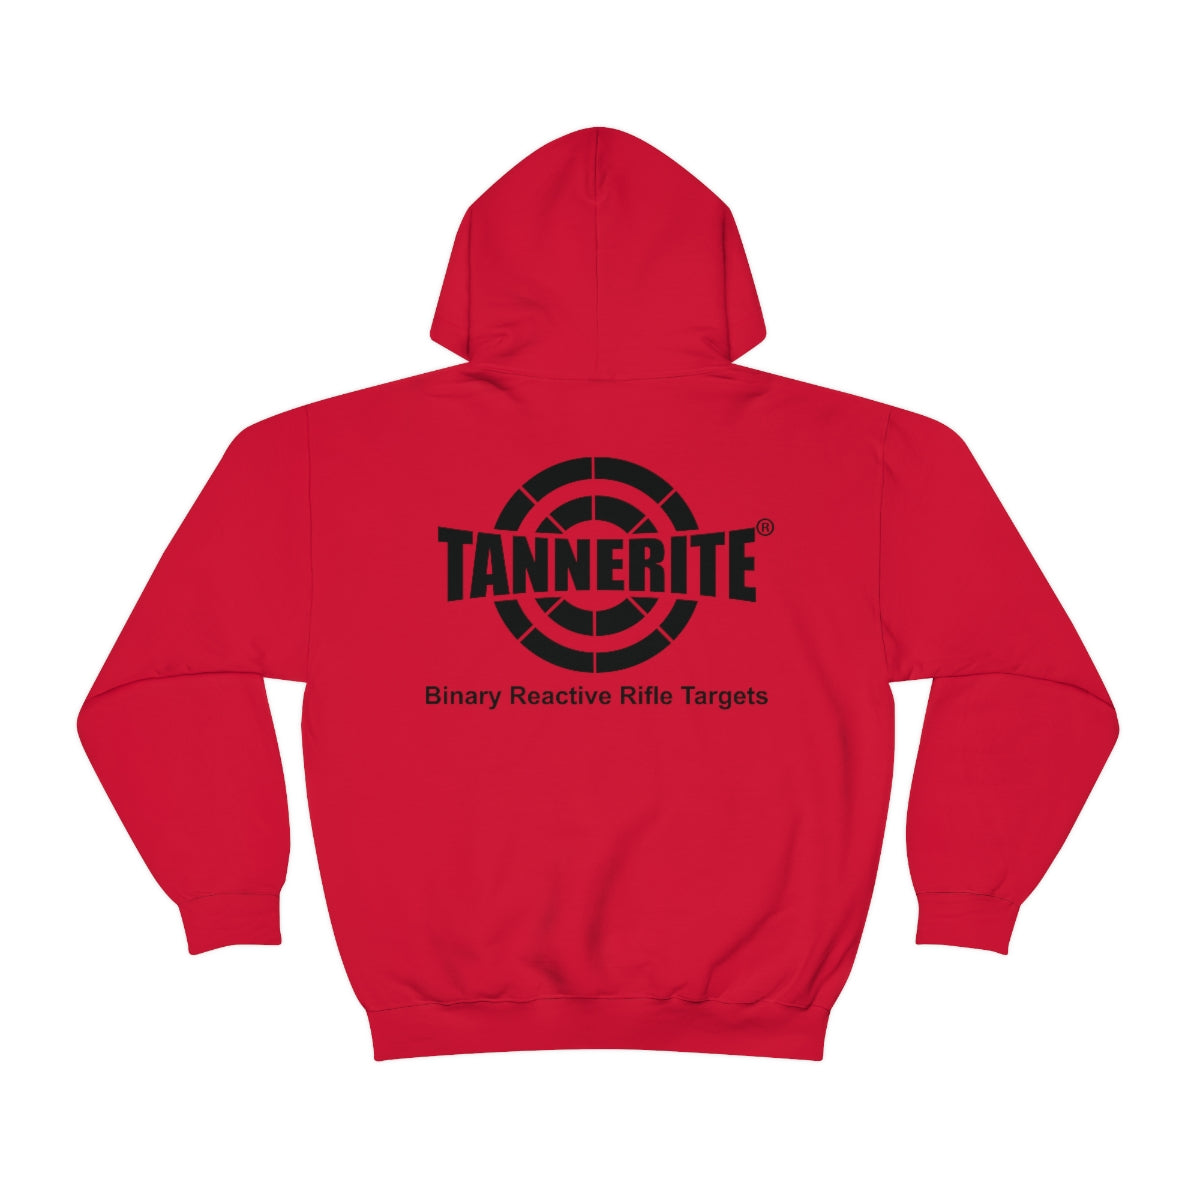 Tannerite® Targets Black Logo Hoodie - front and back design